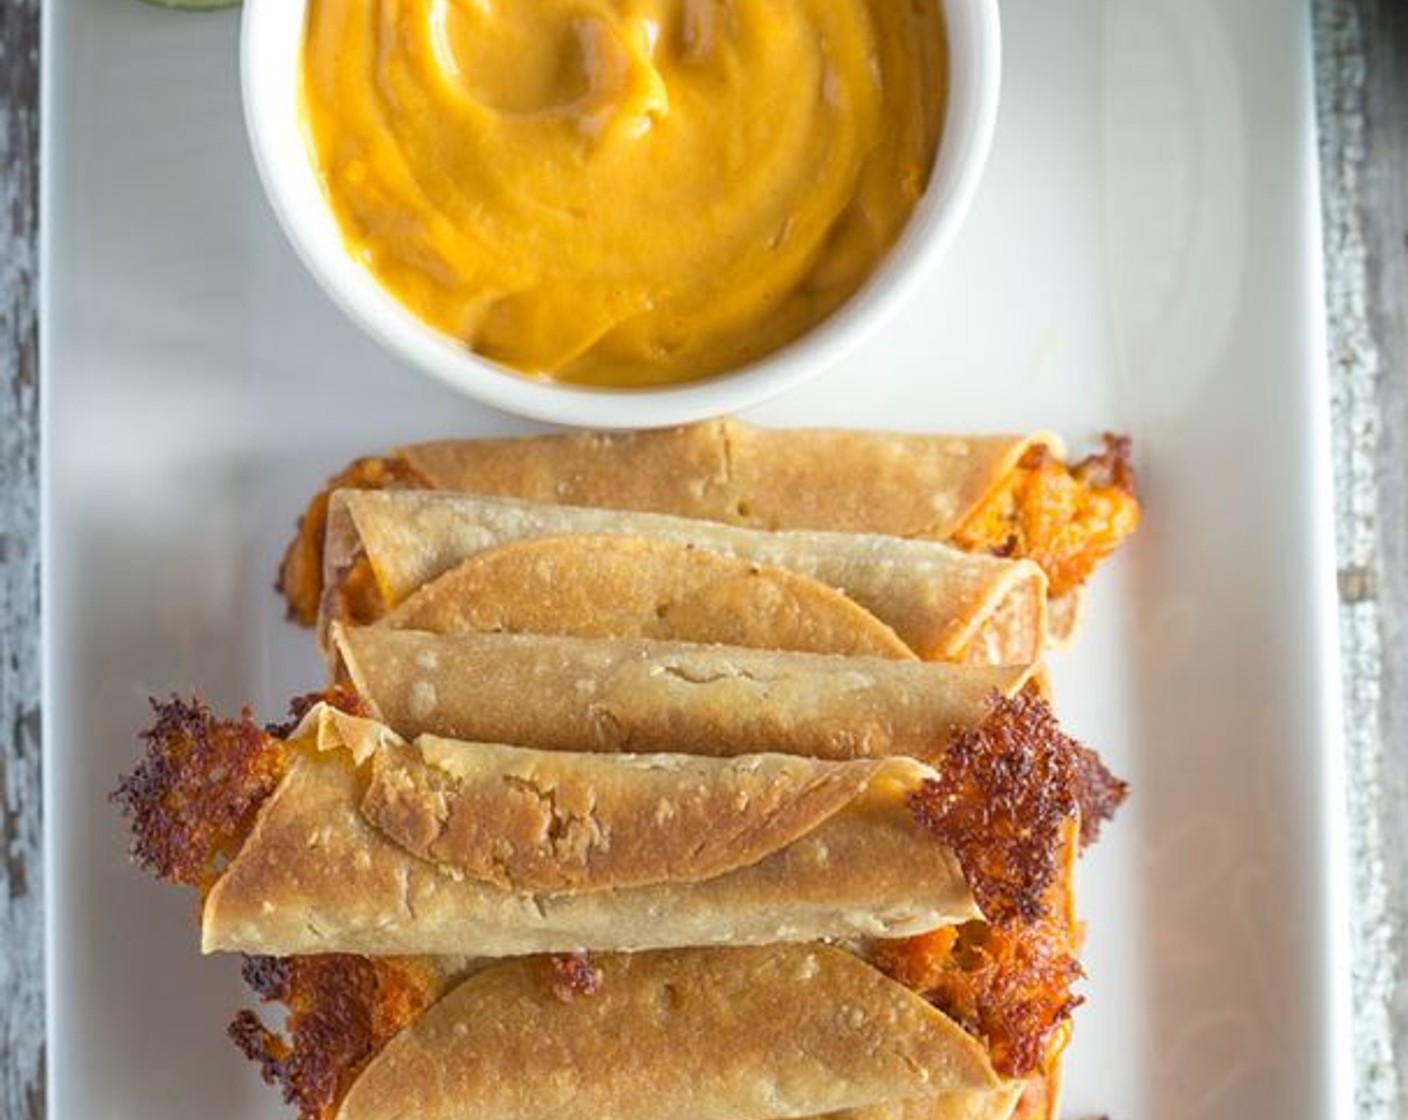 Baked Taquitos with Creamy Salsa and Guacamole